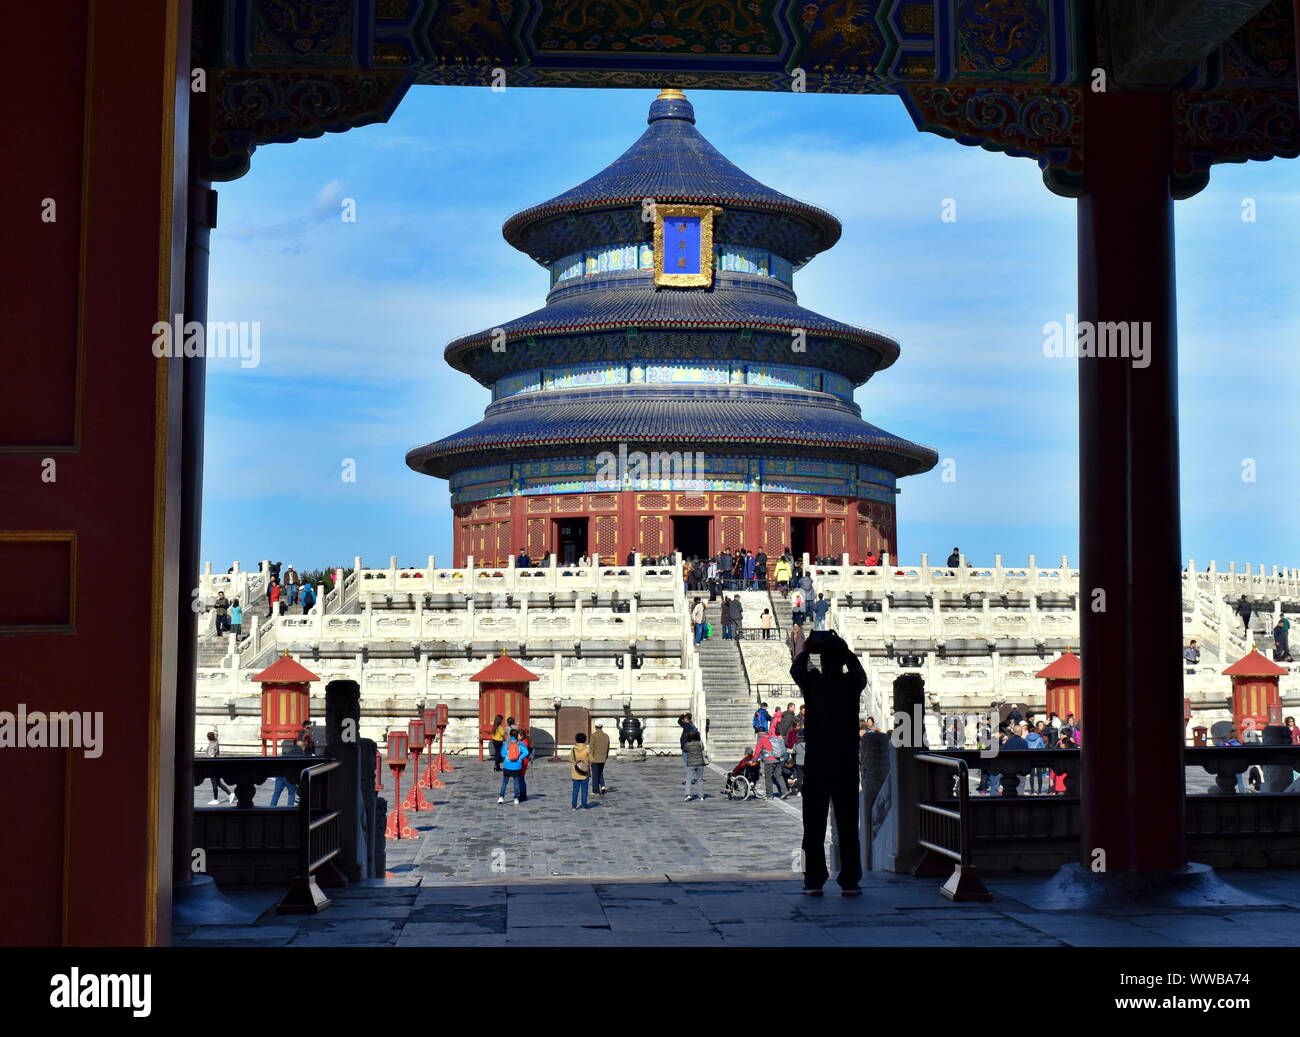 Beijing Temple of Heaven altar framed under pavilion architecture, China Stock Photo